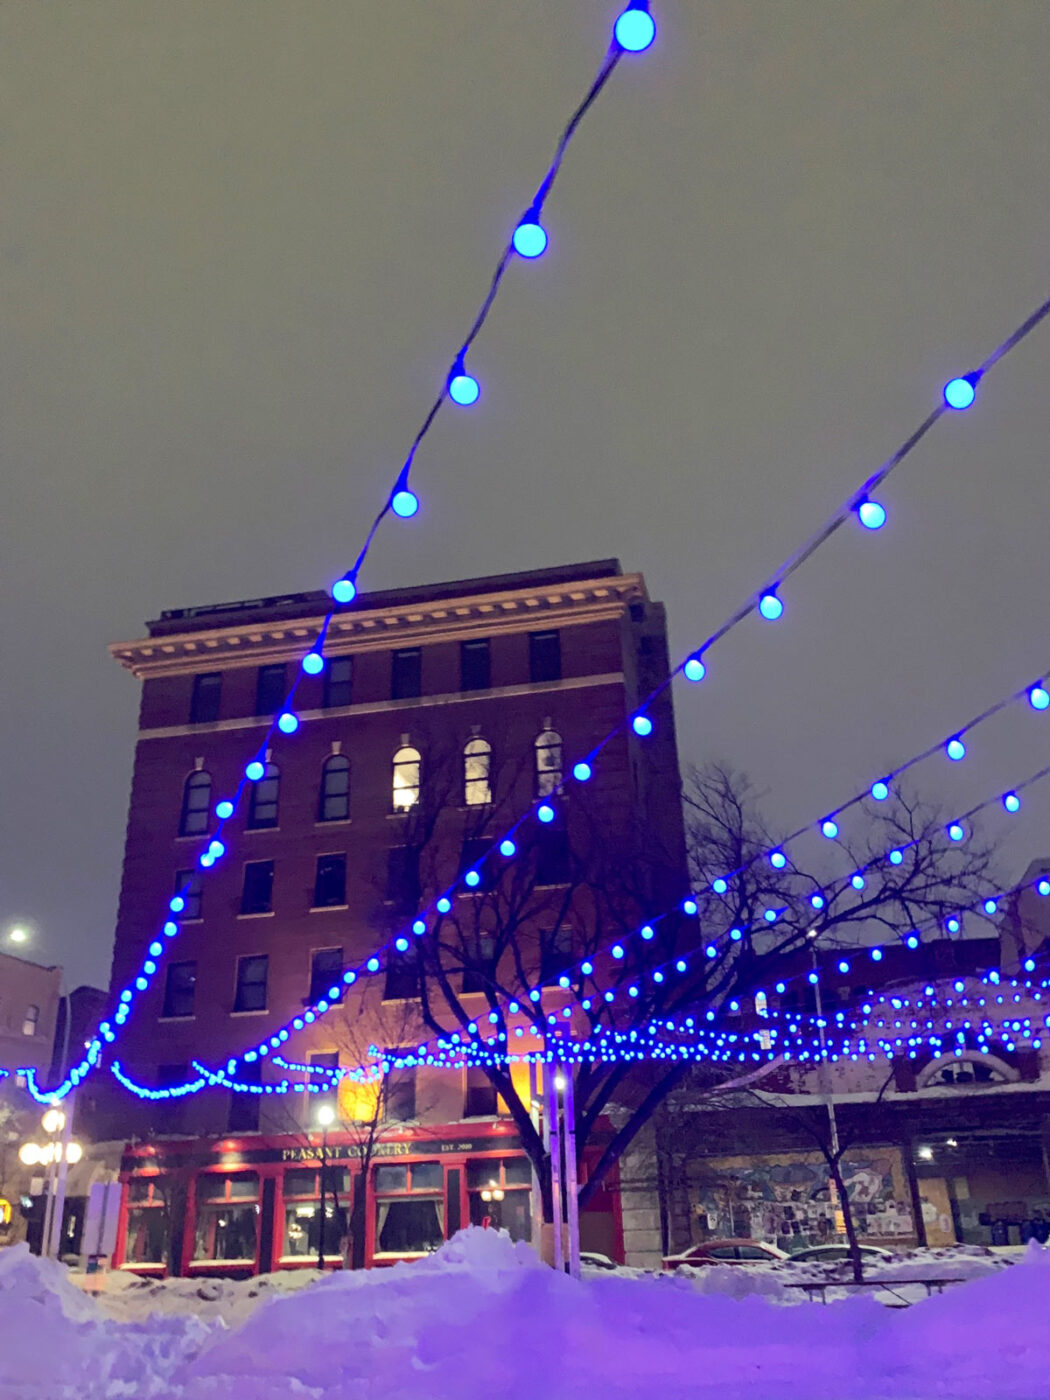 A beautiful city coffee shop looking very cozy in the snow and pretty blue lights.